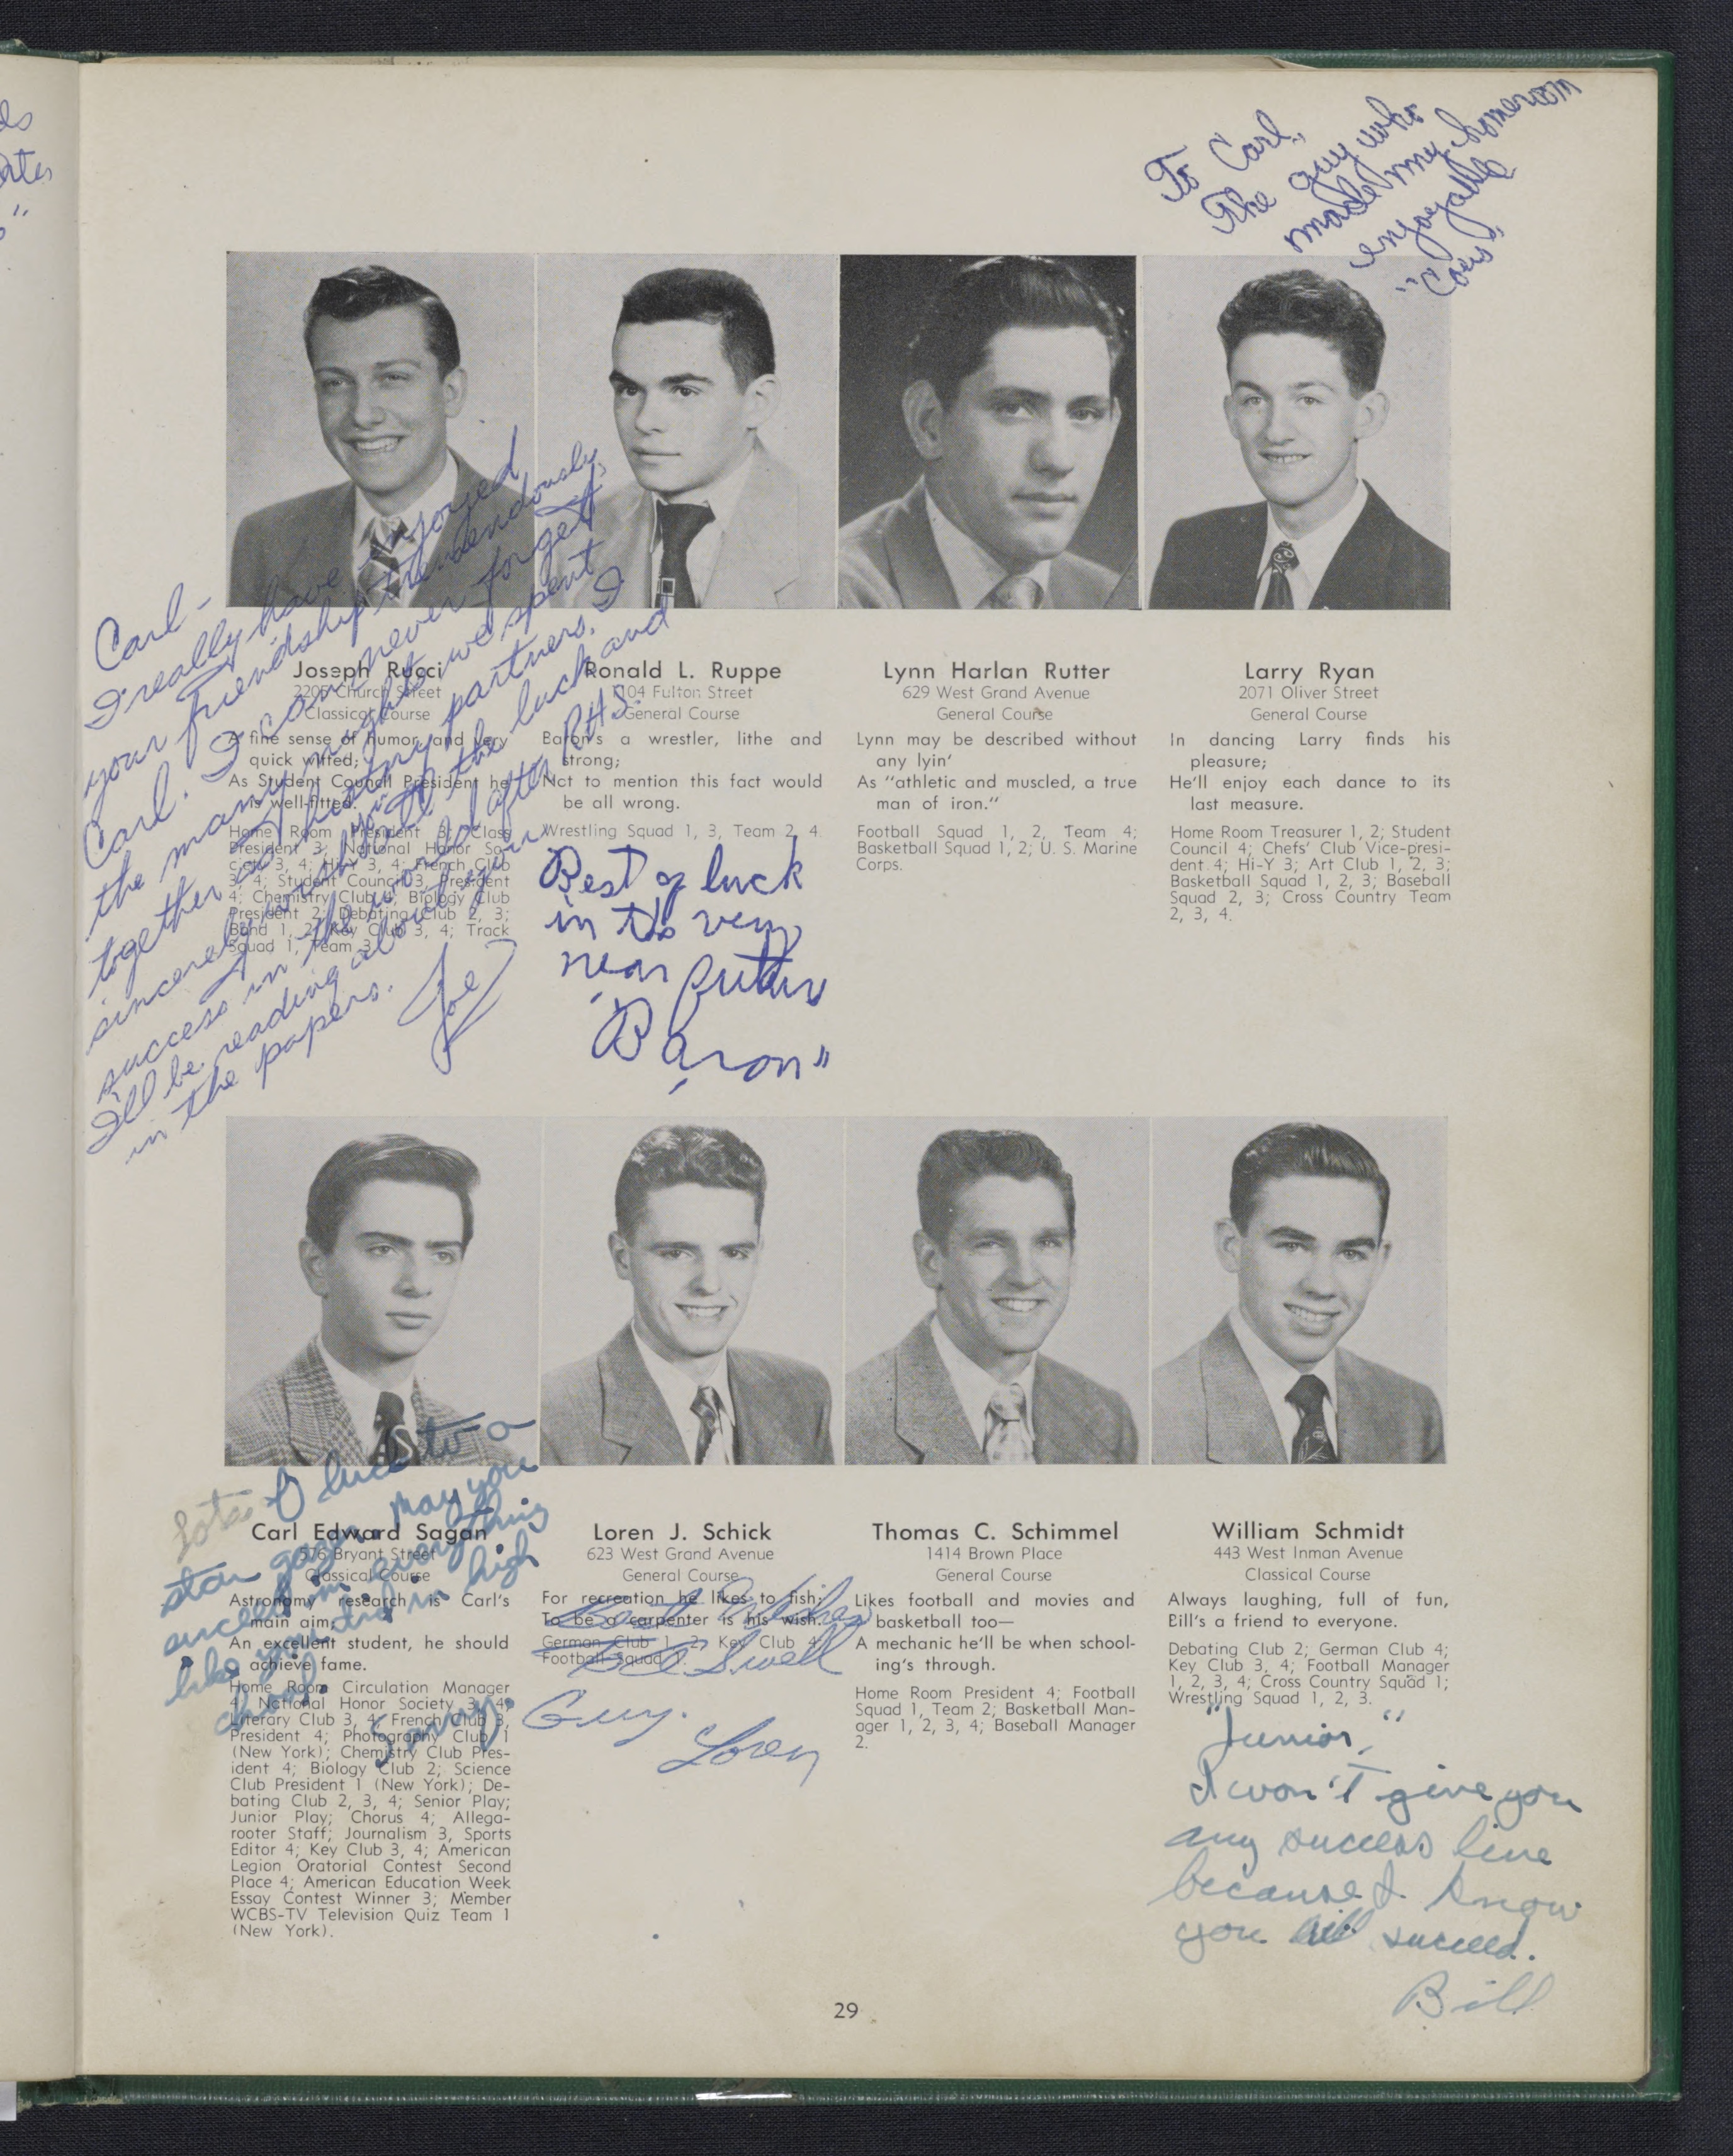 Carl Sagan’s senior high school yearbook, below the photo: Astronomy research is Carl’s main aim; An excellent student, he should achieve fame. 1951, Rahway High School yearbook